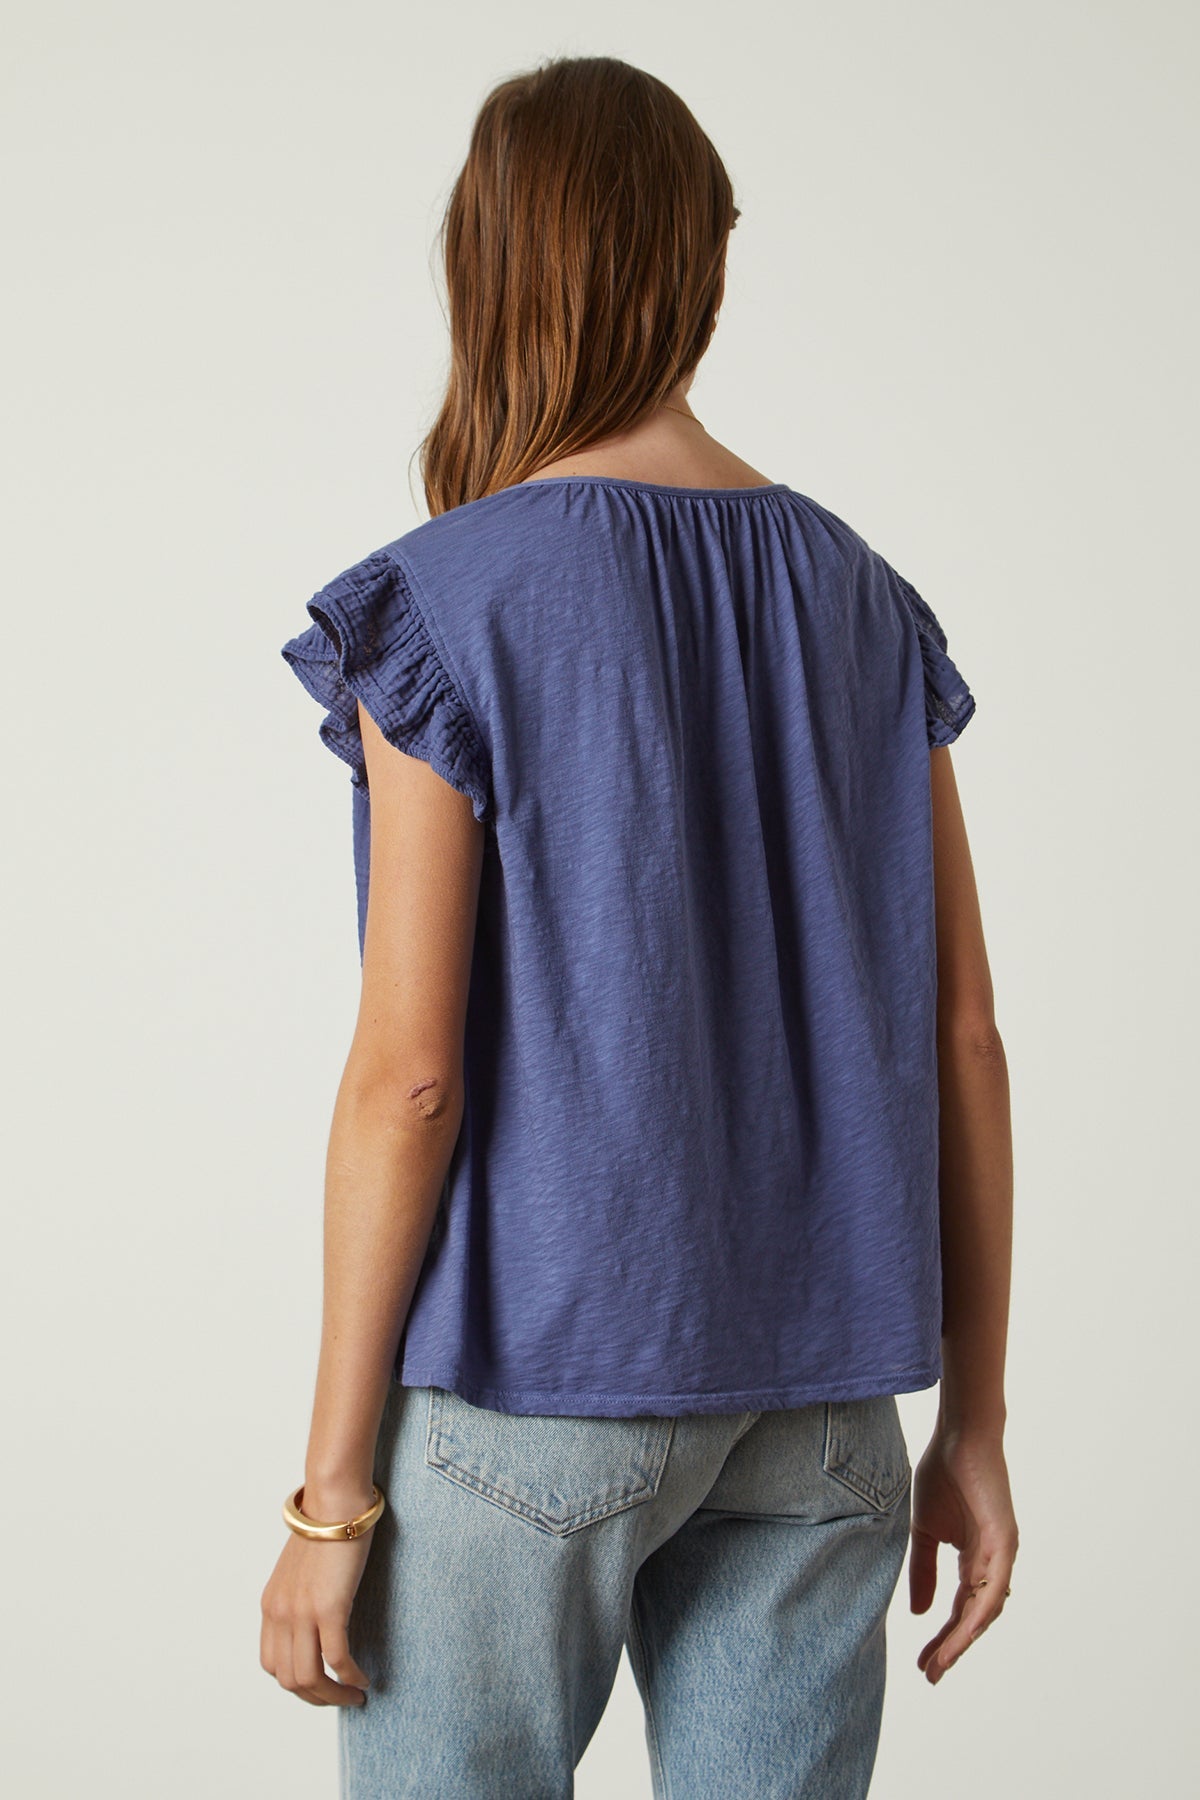   the back view of a woman wearing Velvet by Graham & Spencer's REMI RUFFLE SLEEVE TOP with blue ruffled sleeves. 